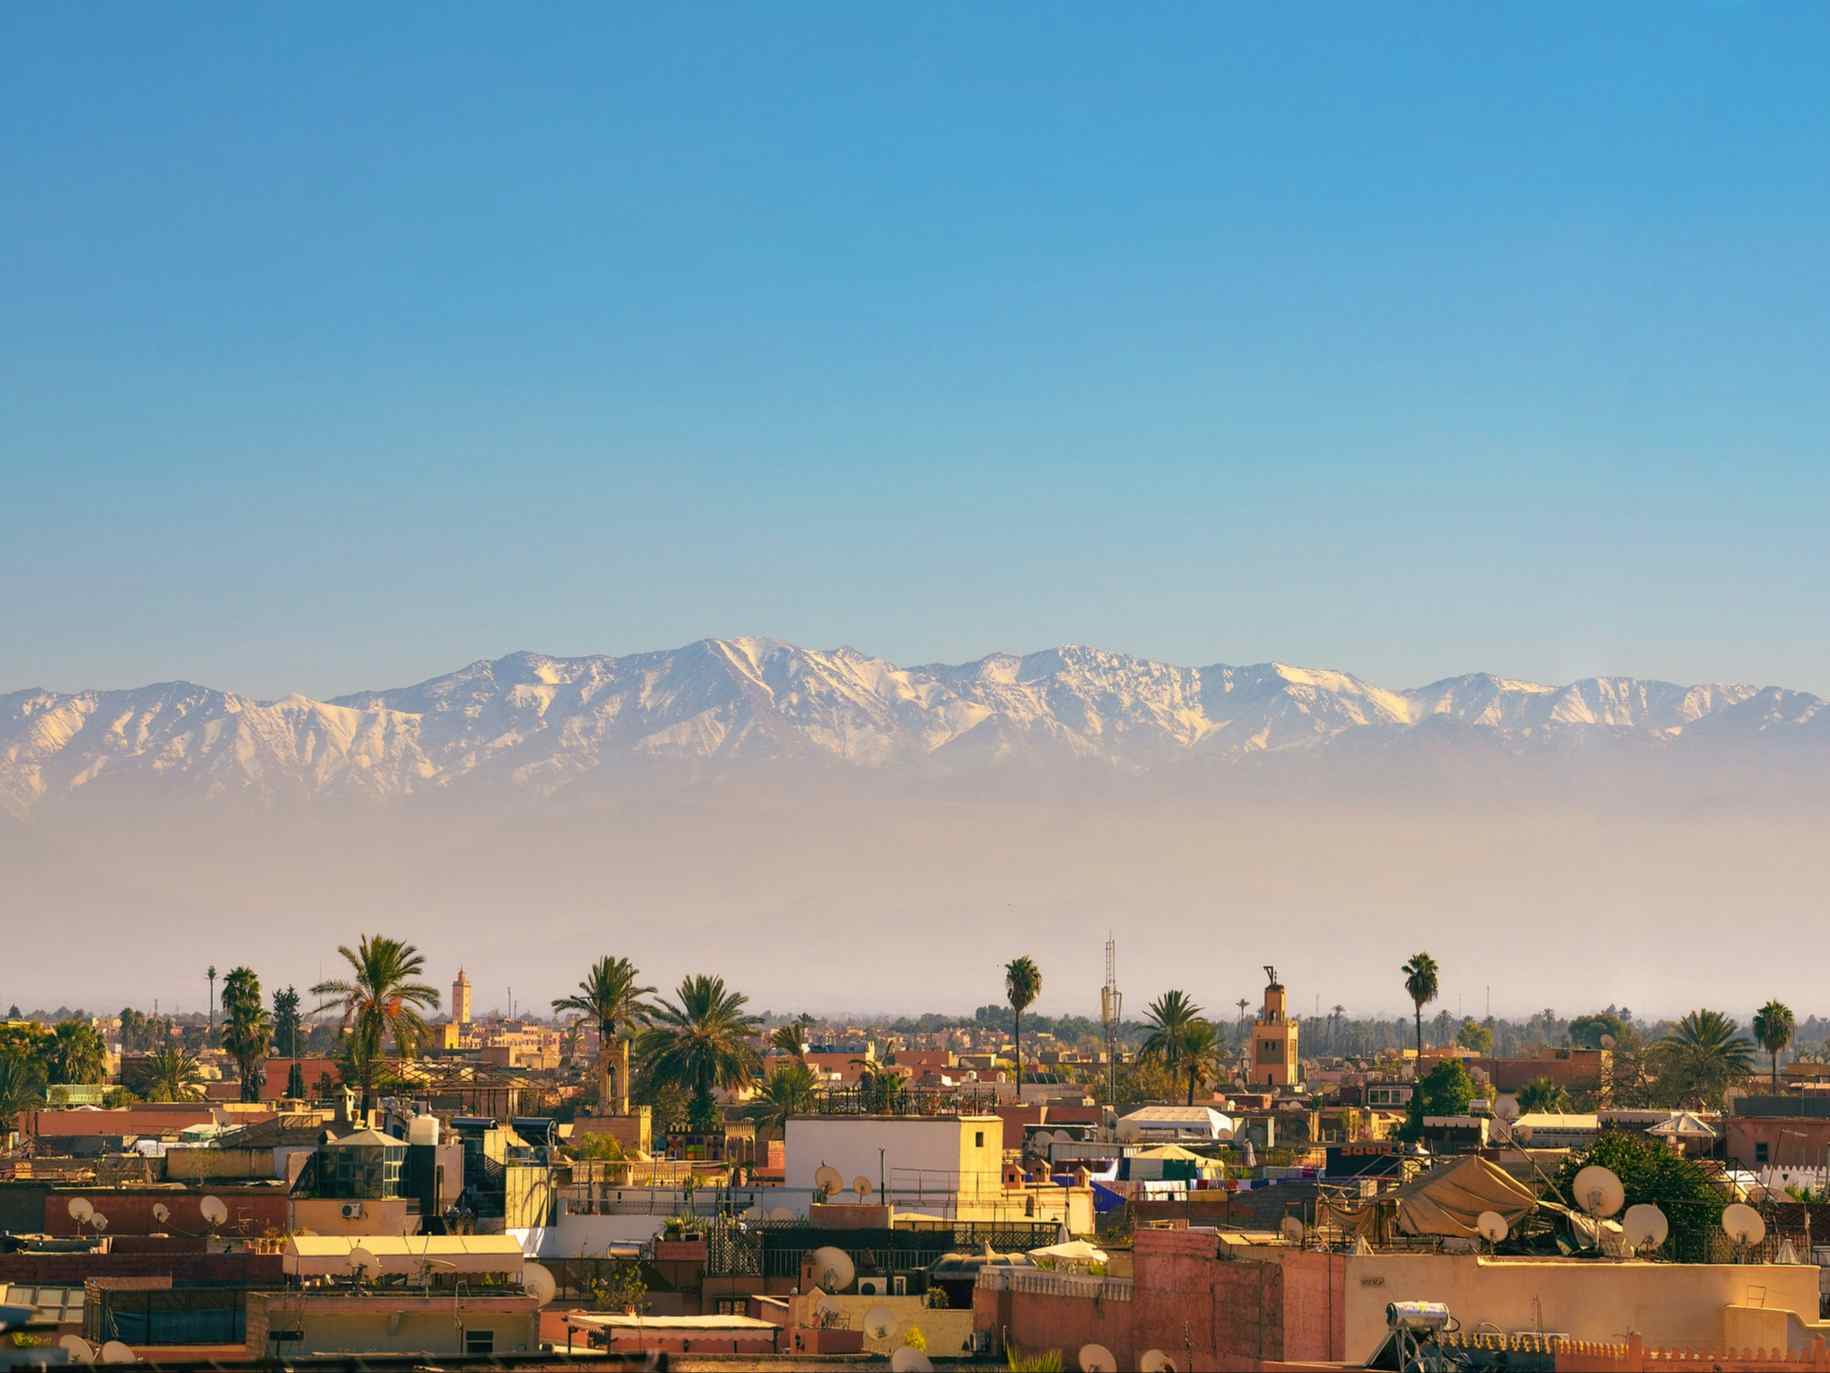 Marrakech city skyline in Morocco with snowy Atlas mountains in the background.